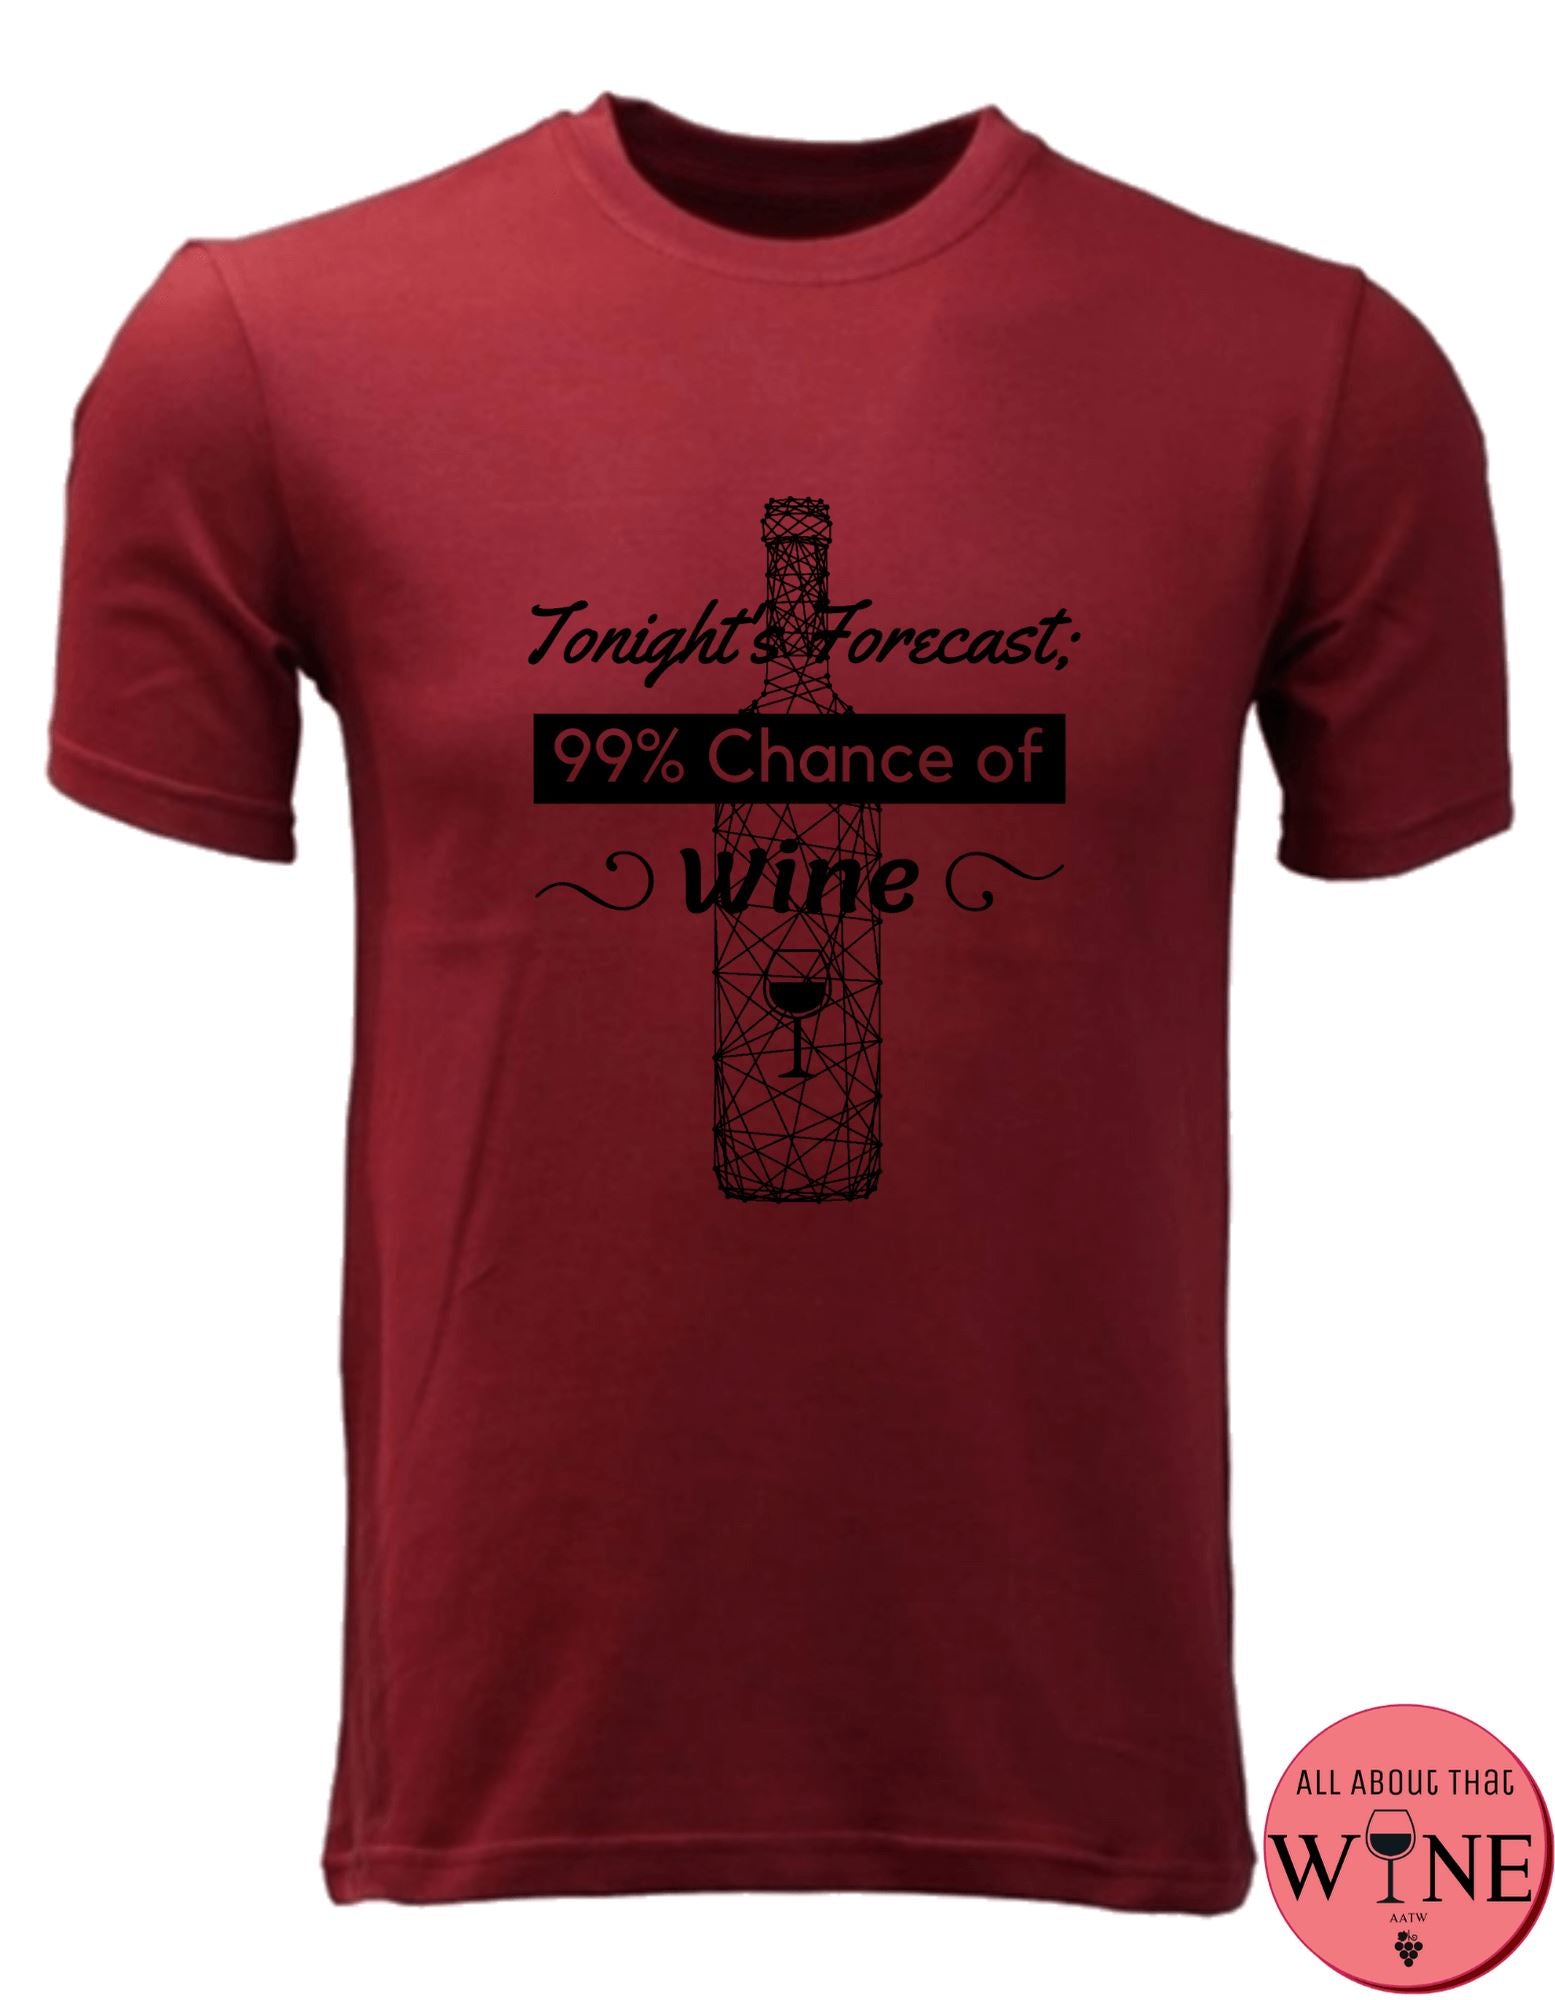 Tonight's Forecast - Unisex/Male M Deep red with black